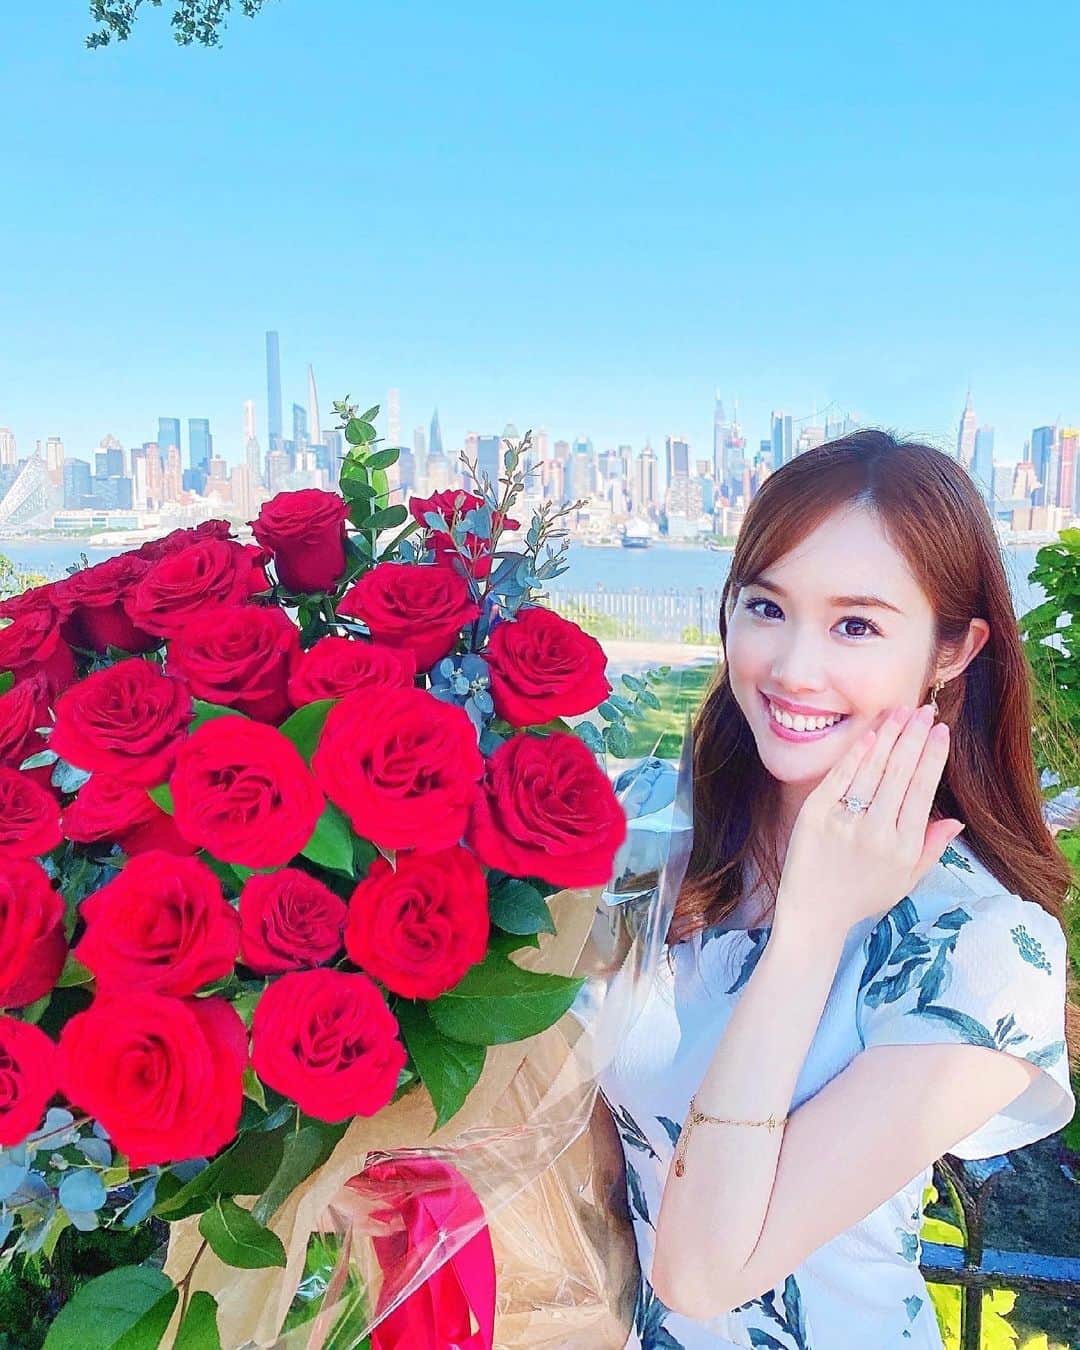 メロディー・モリタのインスタグラム：「I said YES!!😊💍🌹✨ この度、かねてよりお付き合いしておりました方と結婚することになりました✨  I'm going to get married!💖 Ever since the day I met him, I thought that he was such a polite and caring person with the warmest smile. As I got to know him more day by day, he also turned out to be the funniest yet most hardworking, intelligent person. Throughout the years, I've never heard him boast about his achievements, but I could tell how he is able to make every goal he sets for himself come true through his strong dedication and perseverance. On top of that, being with him makes any moment precious and unforgettable. I love him with my whole heart and feel so blessed to spend the rest of my life with him.☺️  Until now, I've never publicized my "love life" as I'm not the type to post that type of content, but I did want to share about this exciting new chapter with you all. I will continue working and hustling as I have until now, but my environment and lifestyle will change. Knowing that we can get through anything together, I am so excited to begin the journey ahead of us.❤️  いつも心穏やかで器が大きく、常に上を目指し妥協しない彼に、私は多くの刺激を受け成長することができました。  彼が成し遂げてきたことの苦労と自慢を一度も聞いたことはありませんが、その計り知れない努力、そして一つ一つの目標を着実に達成していく姿を心から尊敬しています。  今まで恋愛に関する投稿をしたことがありませんでしたが、これから環境も代わり、人生の新たなスタートということでご報告をさせて頂きました。 （今後は新生活の中で、皆さんのお役に立てるような内容に関しましては少しずつシェアできればと思っております）  彼のサポートも頂きながら、笑顔あふれる温かい家庭を築き、今後も変わらず活動をして参ります。  いつも応援のお言葉やメッセージを下さる皆様、本当に有難うございます。不器用ながらこれからは仕事と家庭を大切に頑張りますので、今後共どうぞ宜しくお願い致します。  メロディー モリタ」